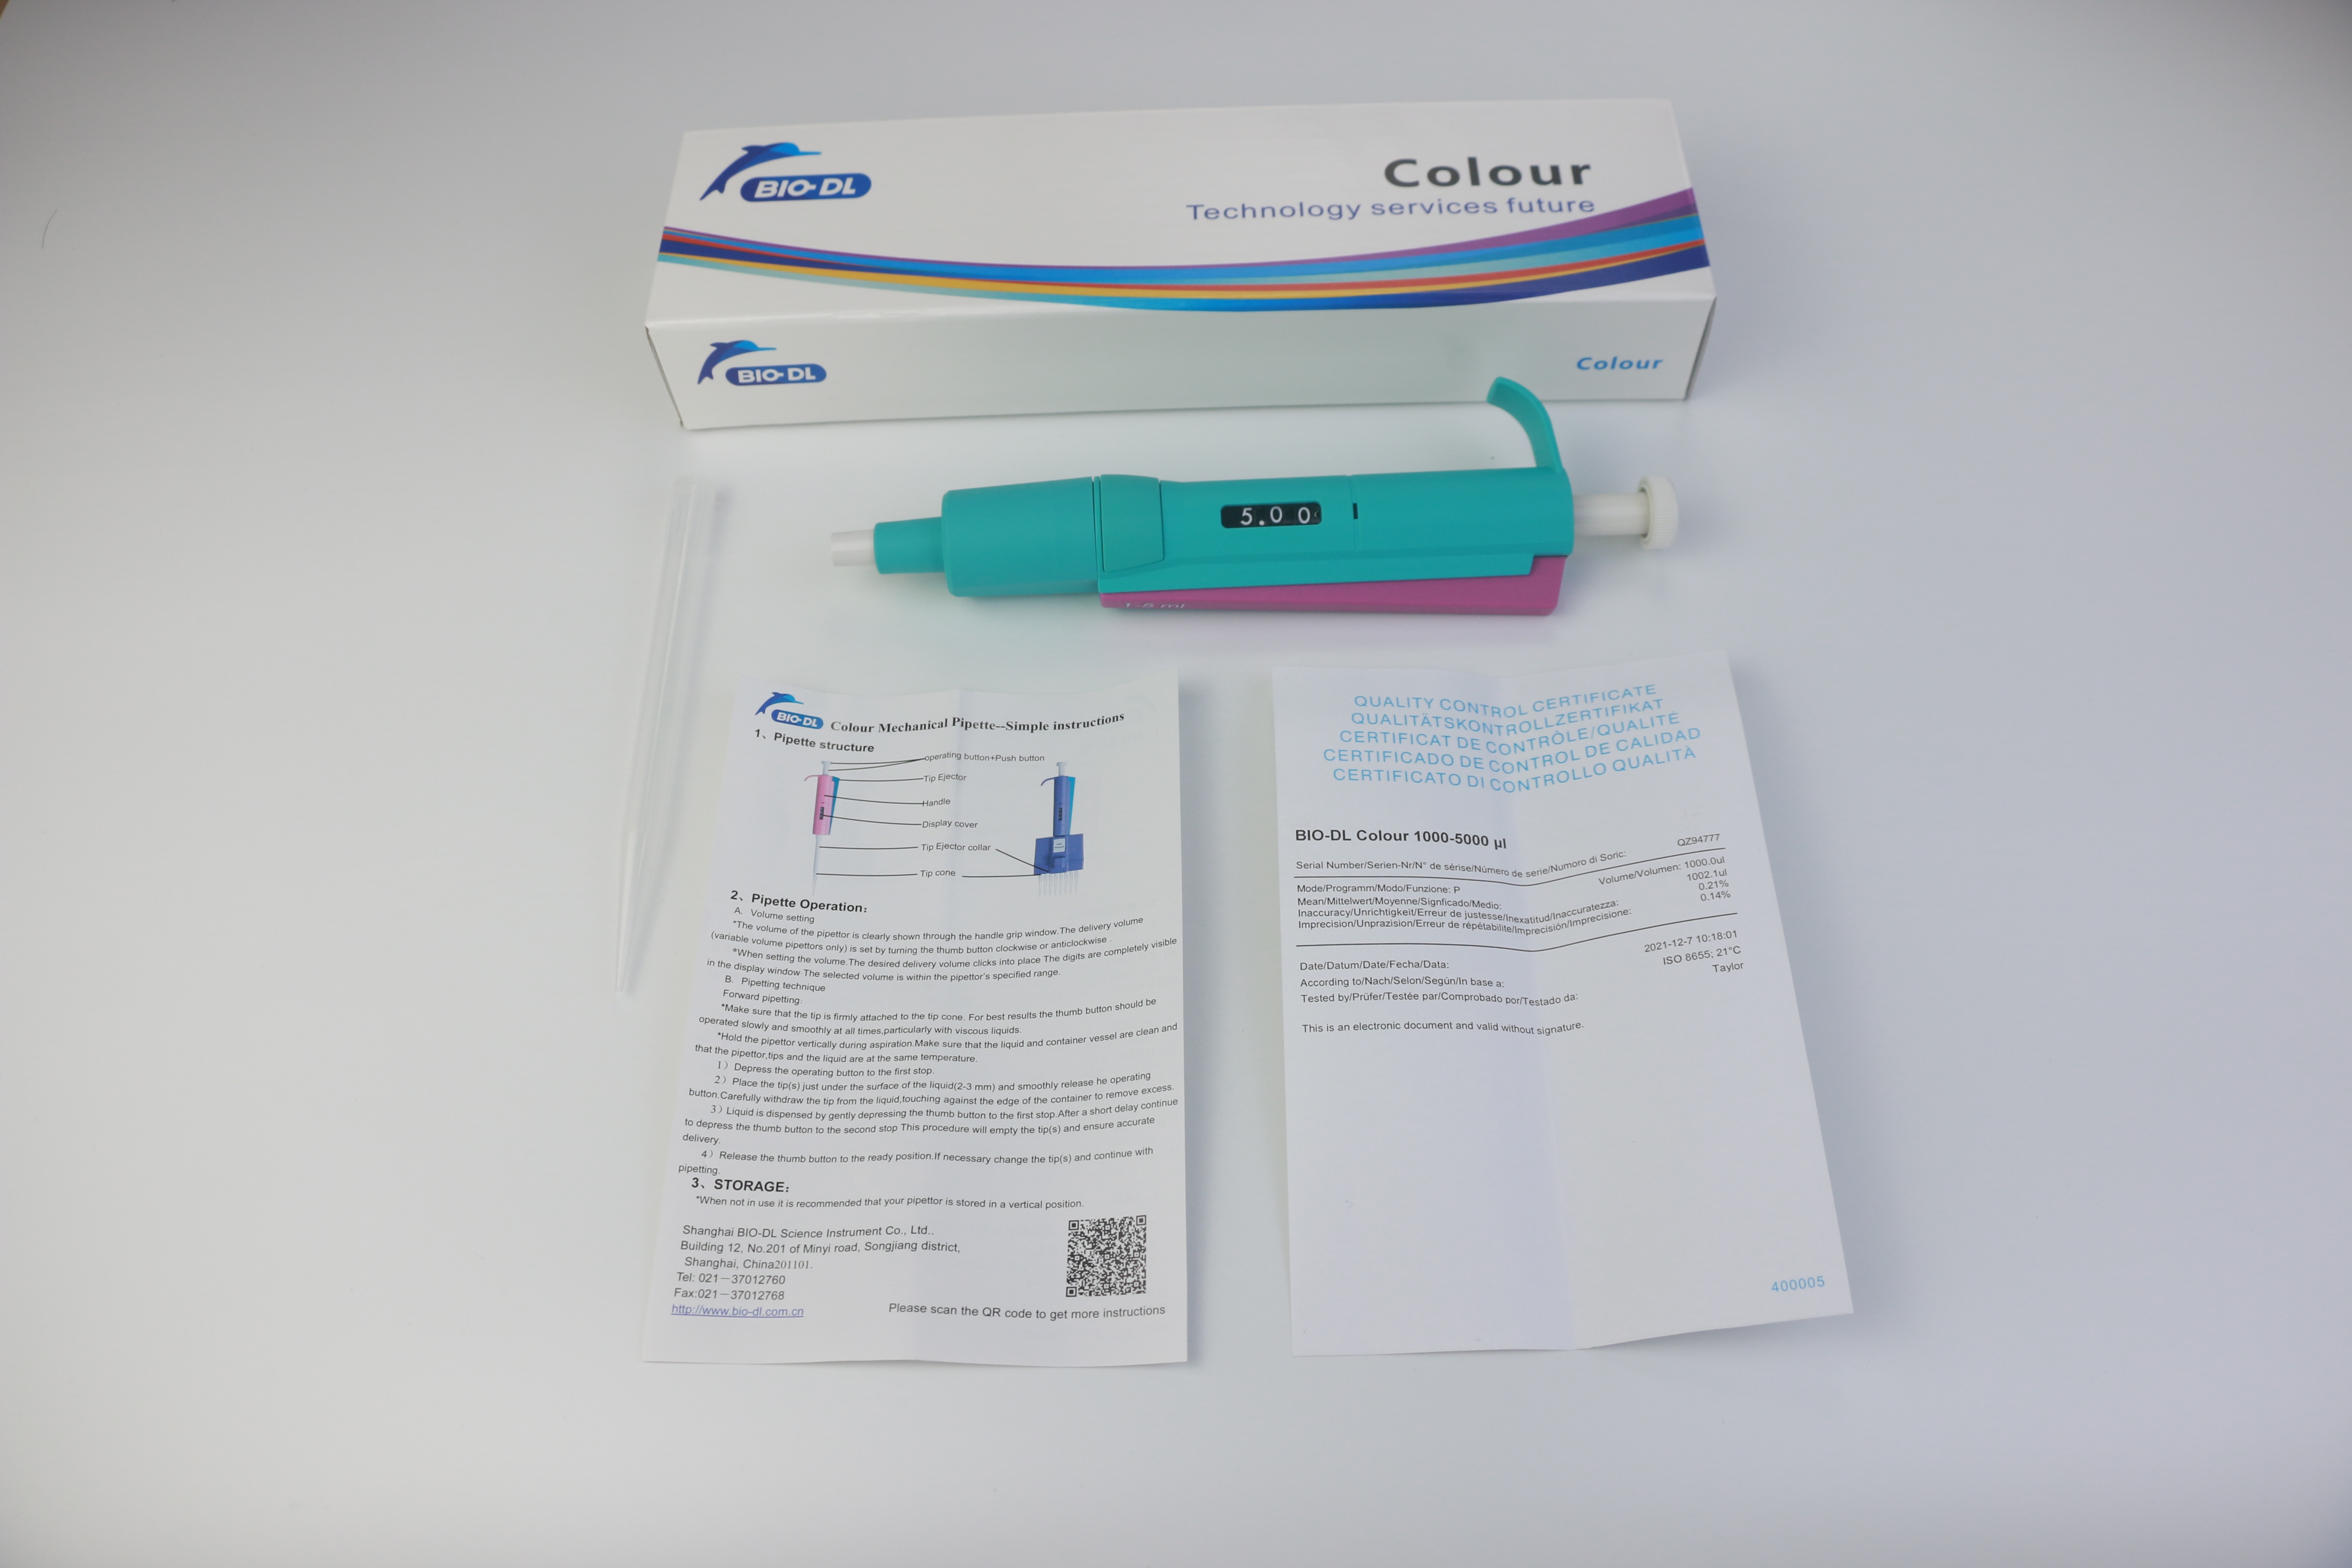 5ml Wear-resisting Medical Colour Pipette